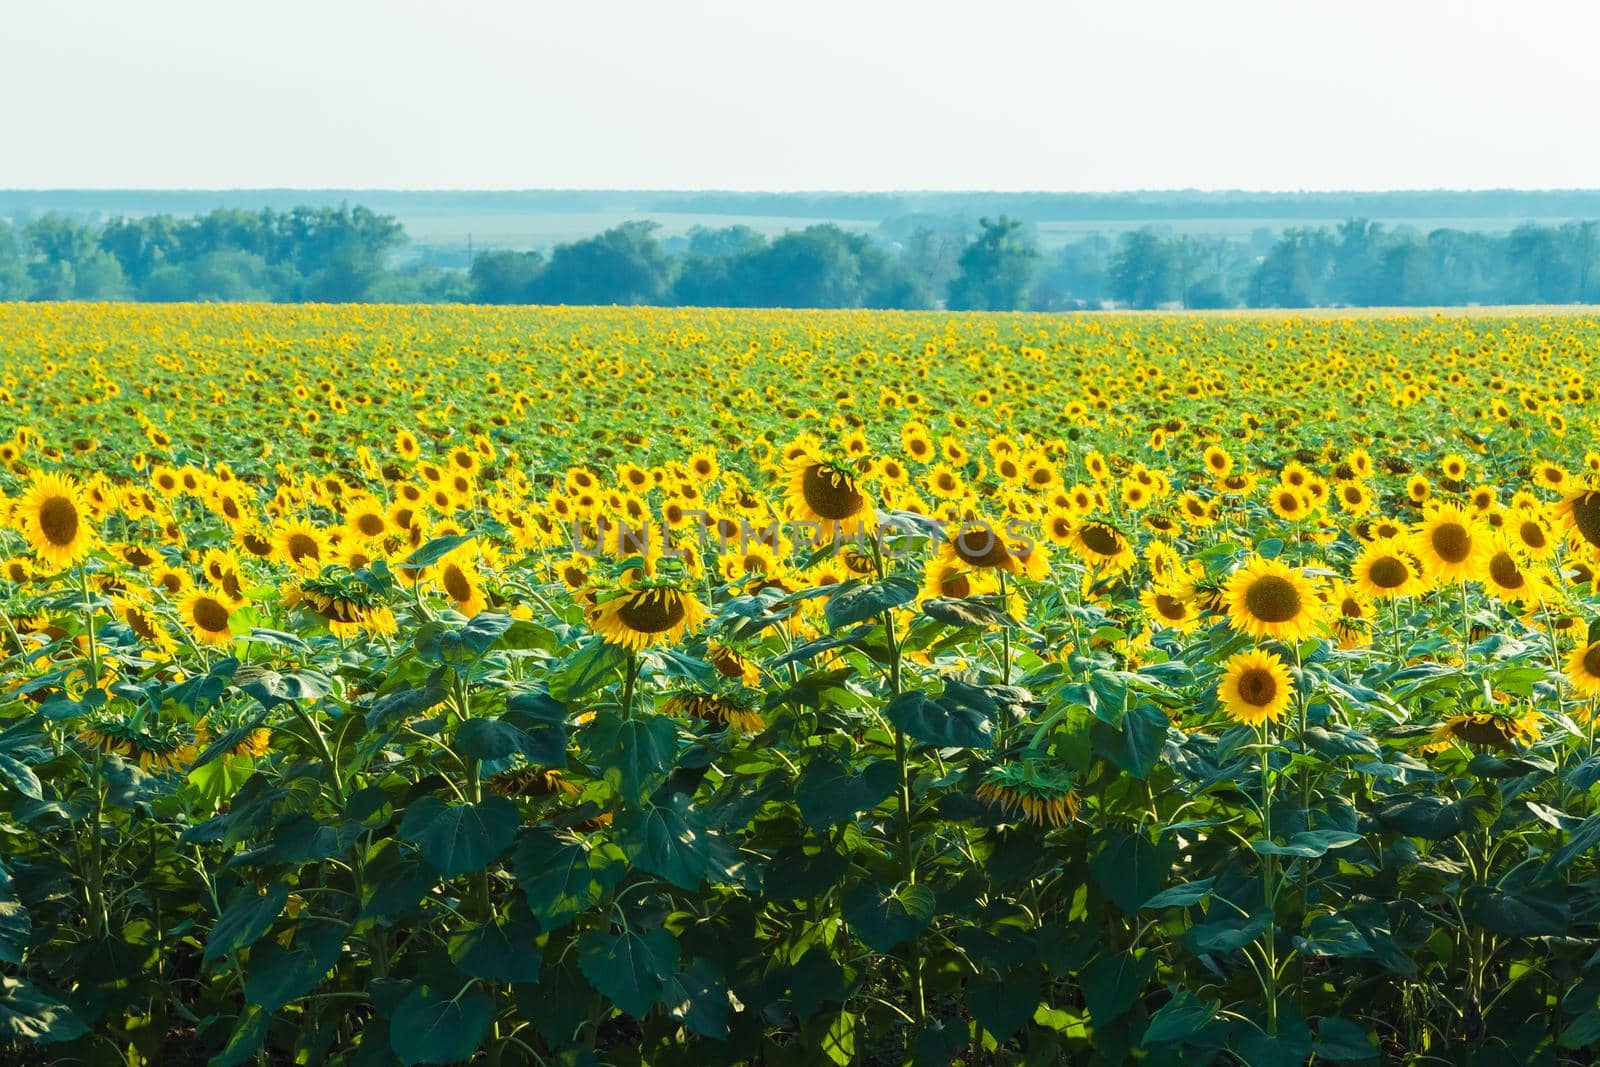 A field of large yellow sunflowers in summer. Yellow petals glow through the sun.